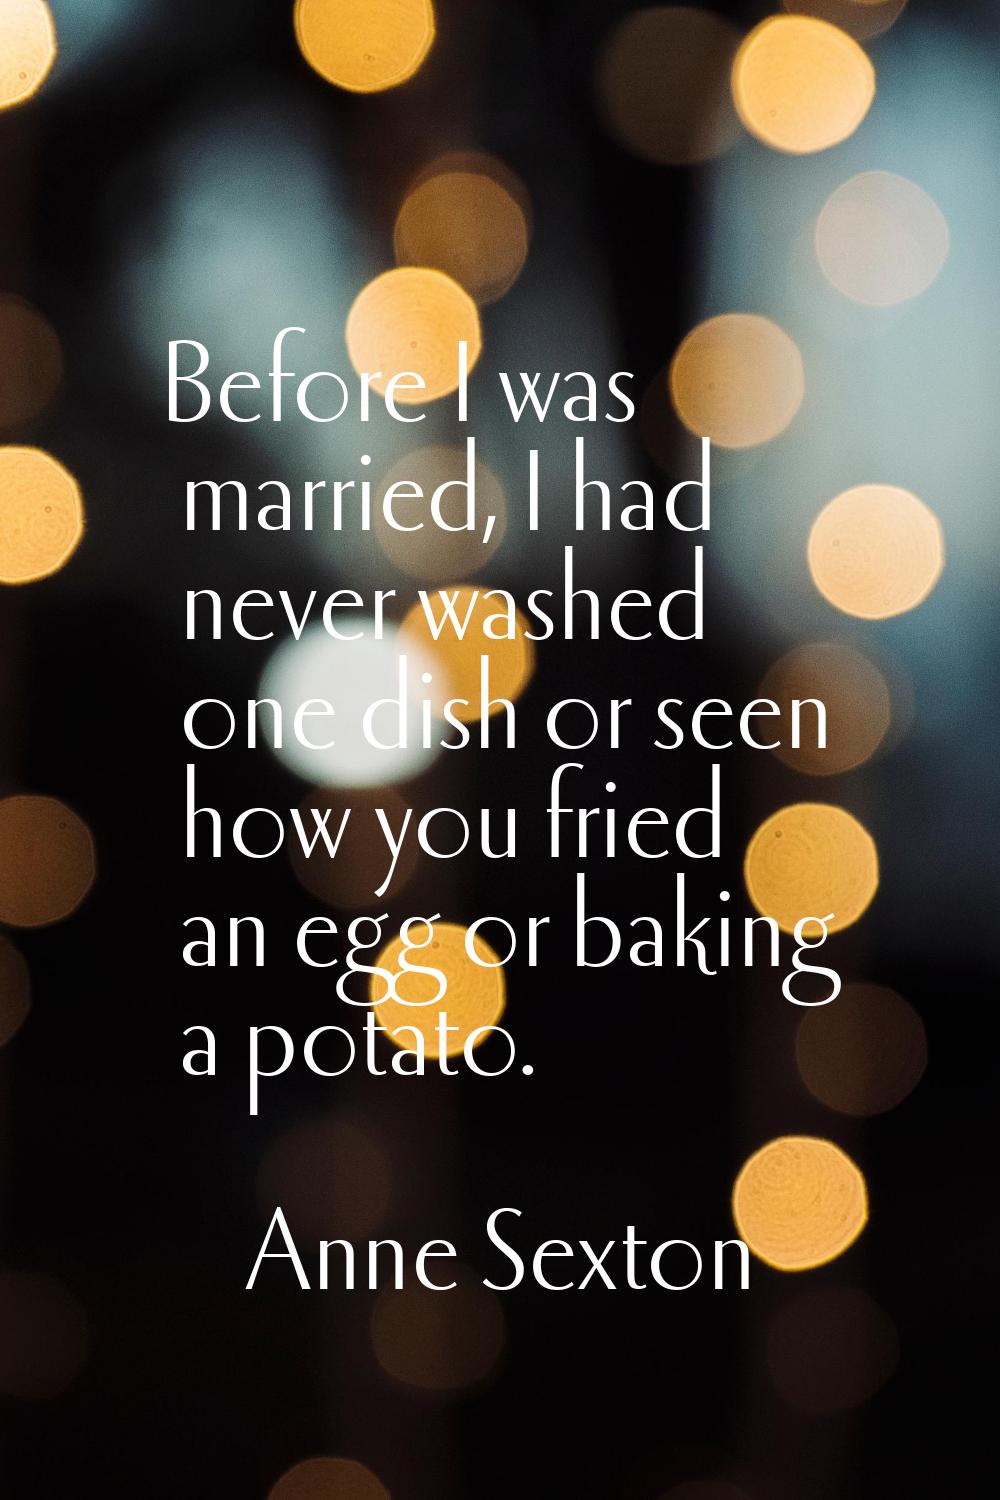 Before I was married, I had never washed one dish or seen how you fried an egg or baking a potato.